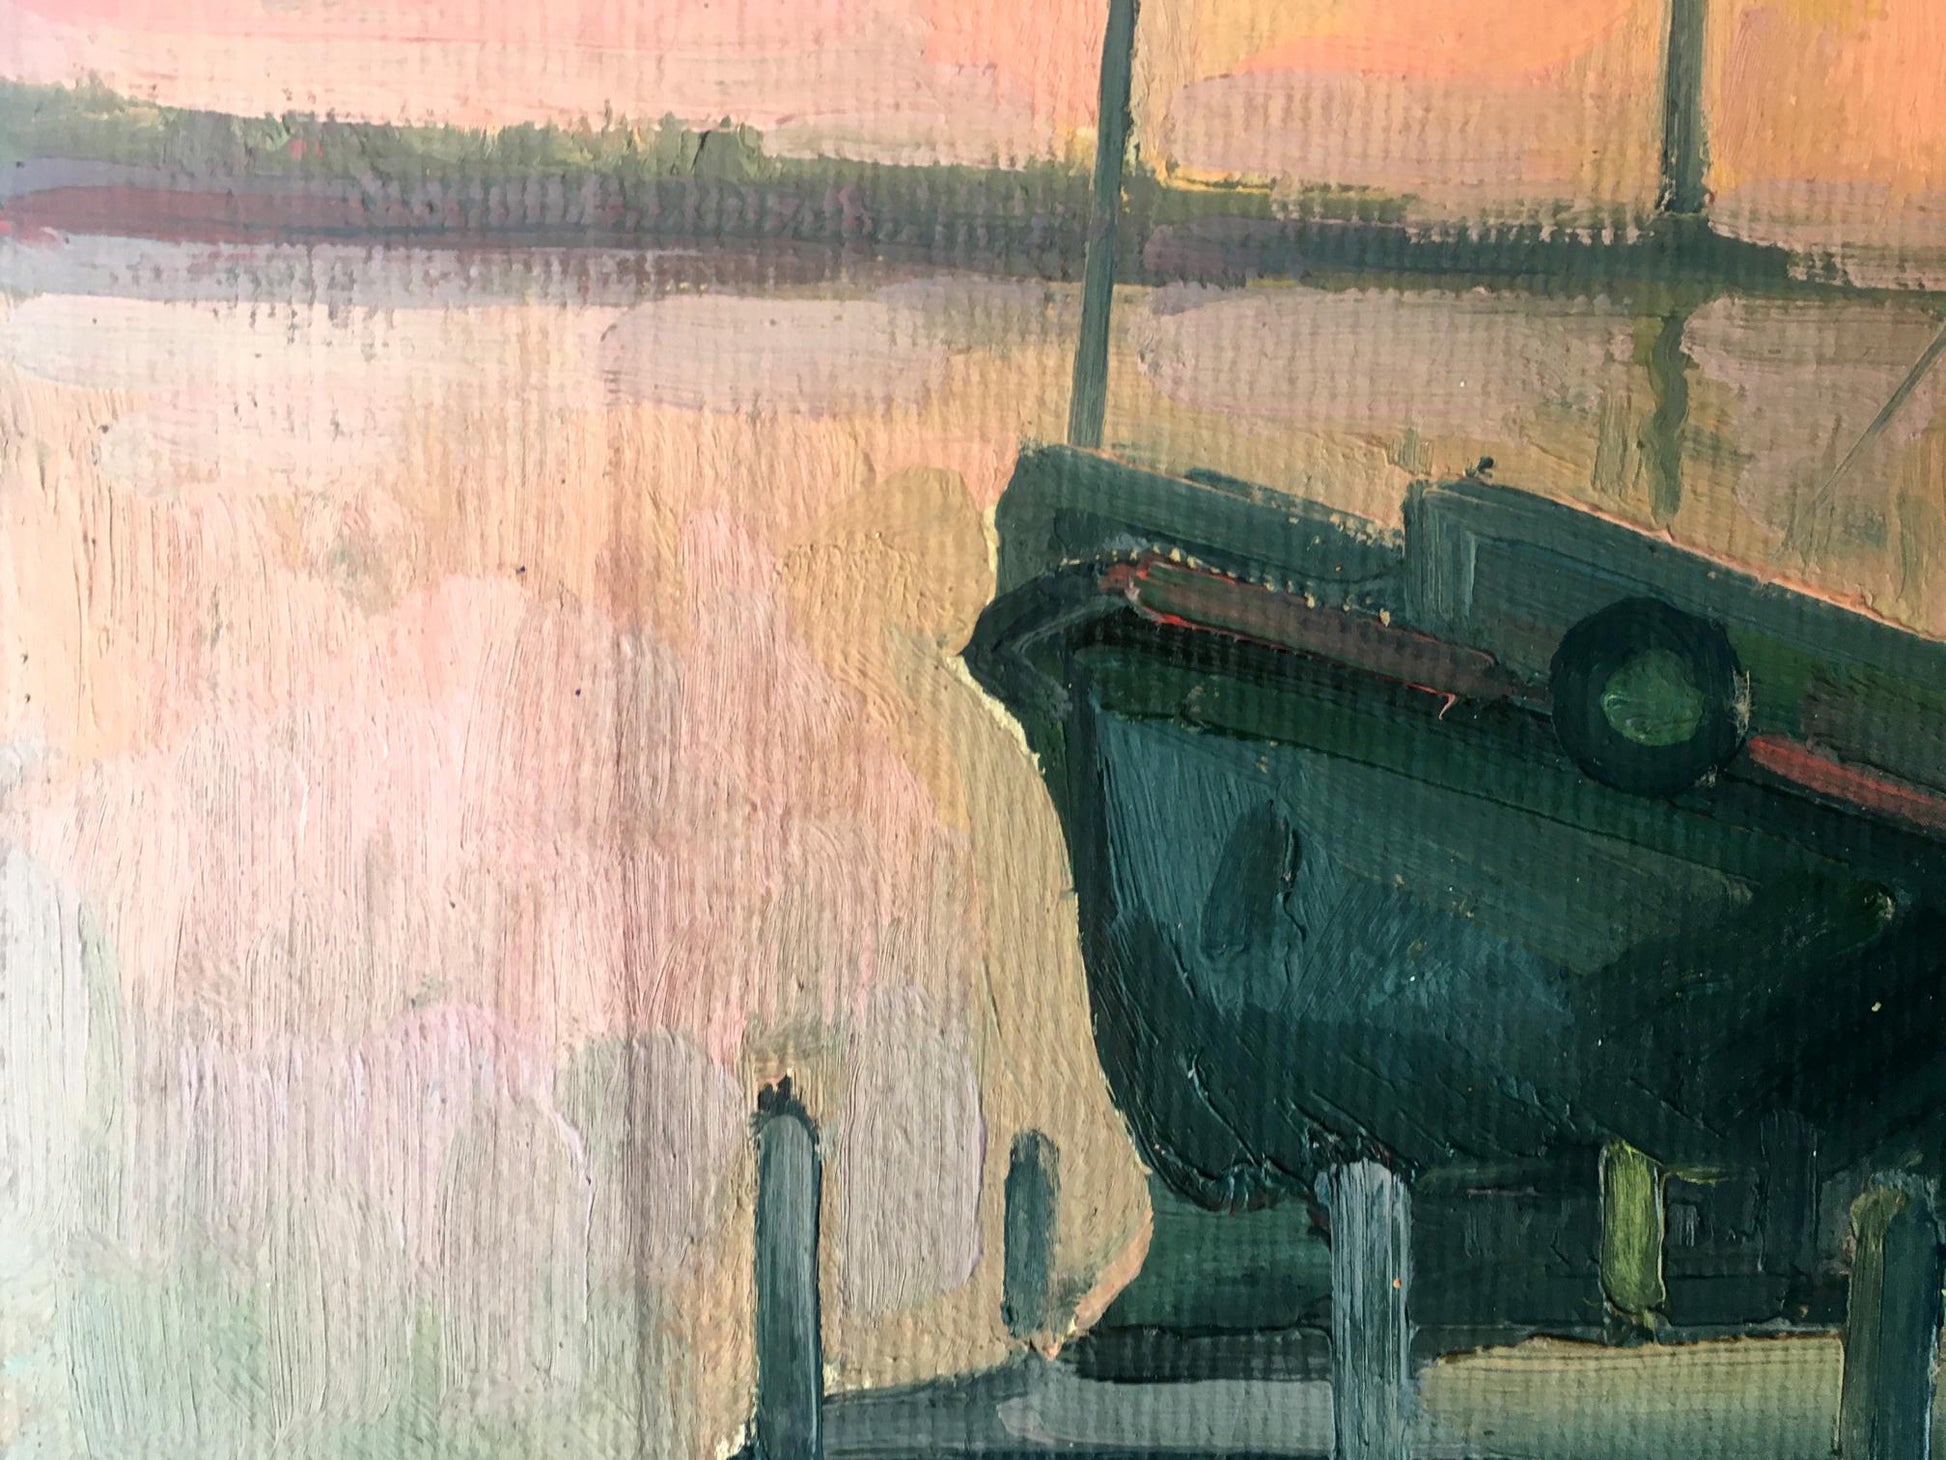 In his oil painting, Peter Dobrev skillfully captures the maritime essence of ships in port